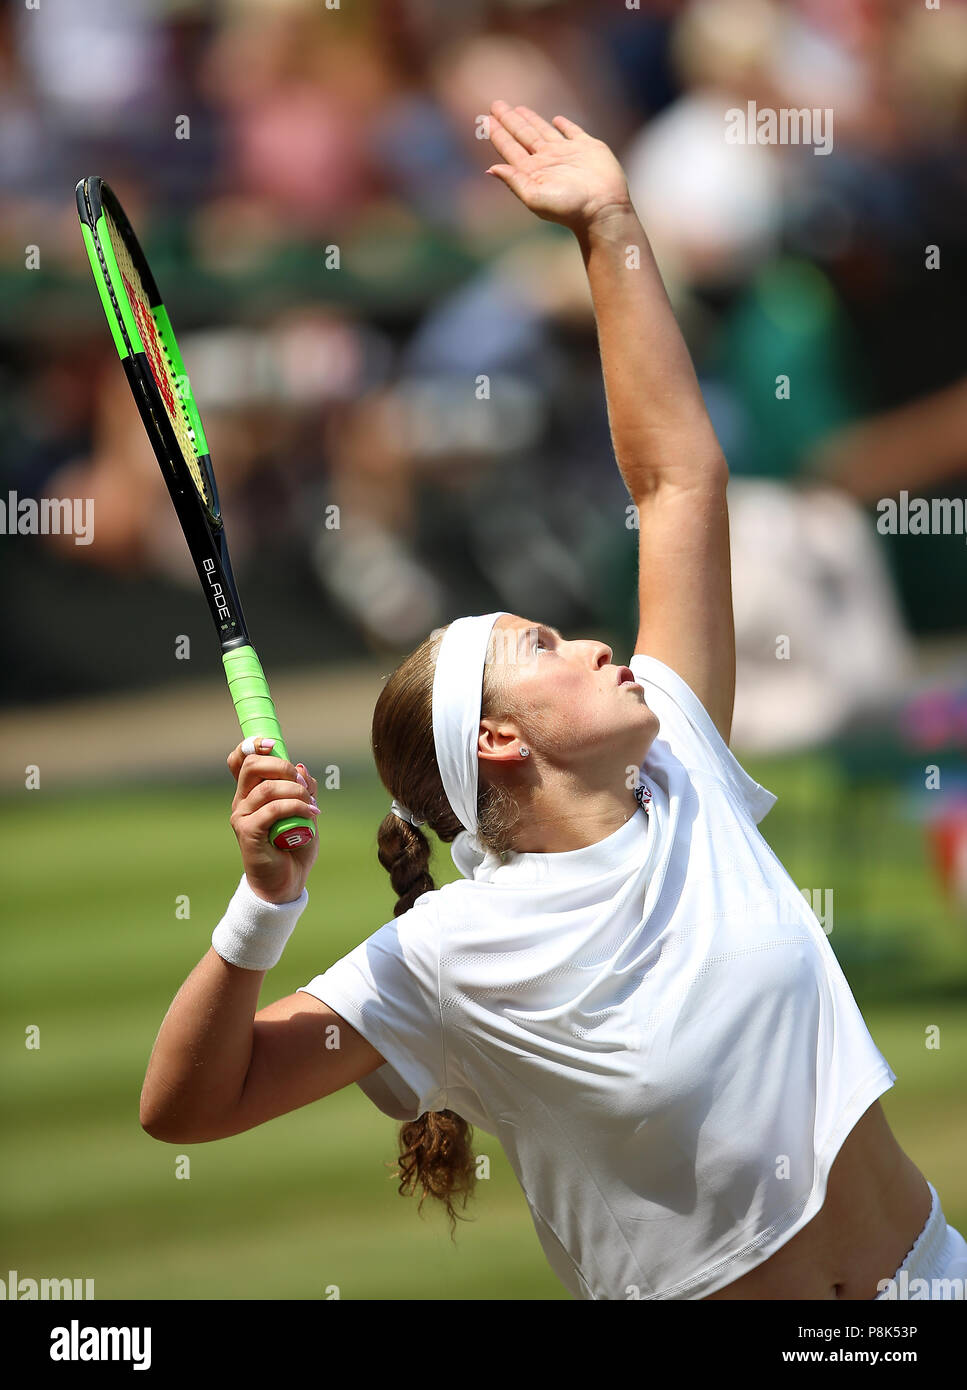 Jelena Ostapenko Serves On Day Ten Of The Wimbledon Championships At The All England Lawn Tennis